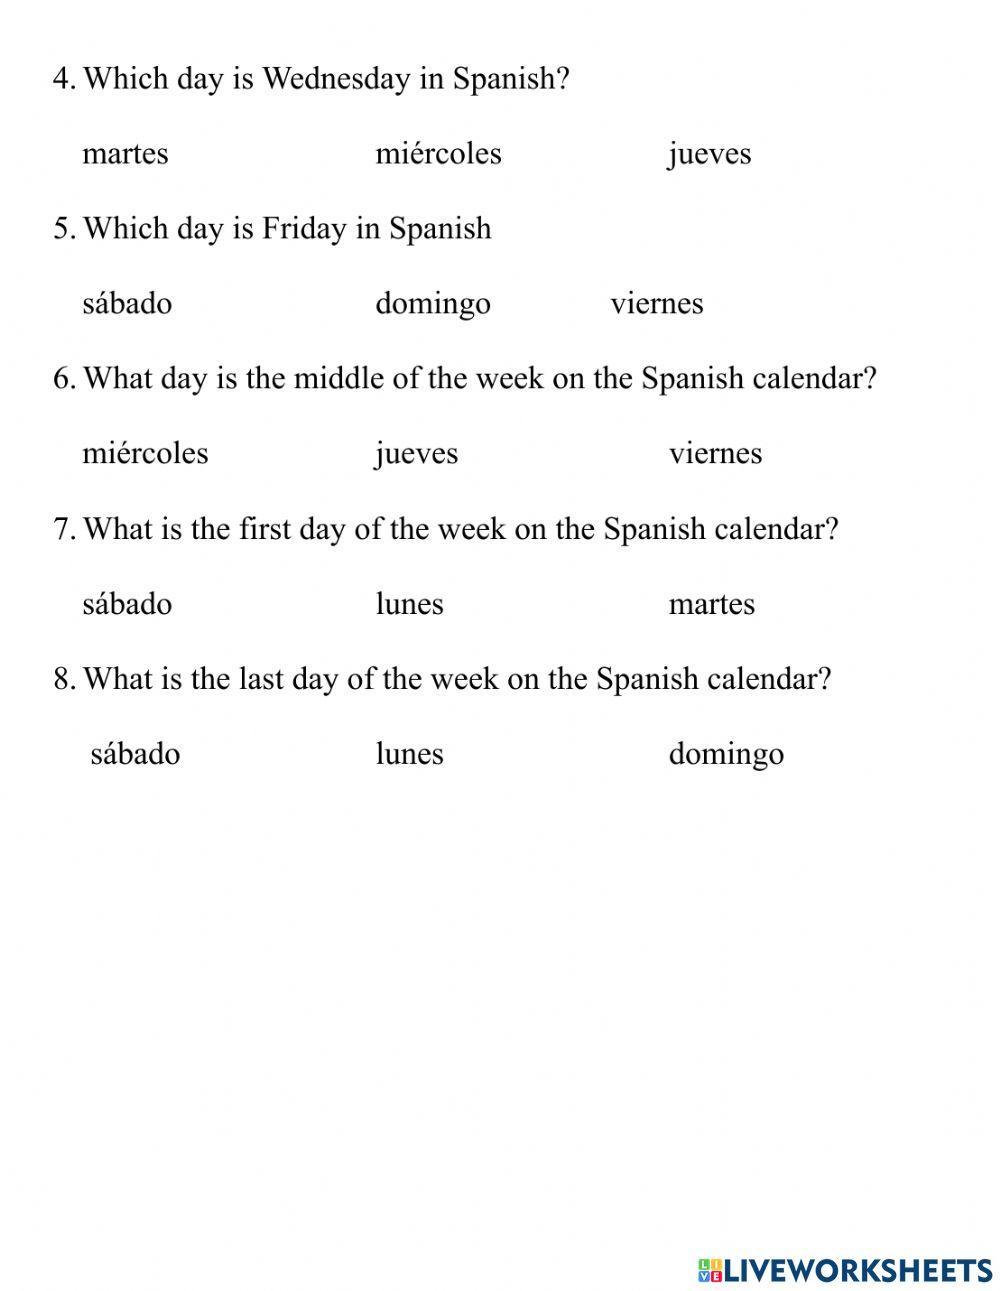 Language for Fun - Feliz miércoles! Did you know that in Spanish calendars,  miércoles (Wednesday) is usually abbreviated as 'X' to avoid confusion with  martes (Tuesday)? Great questions of humanity (that sometimes